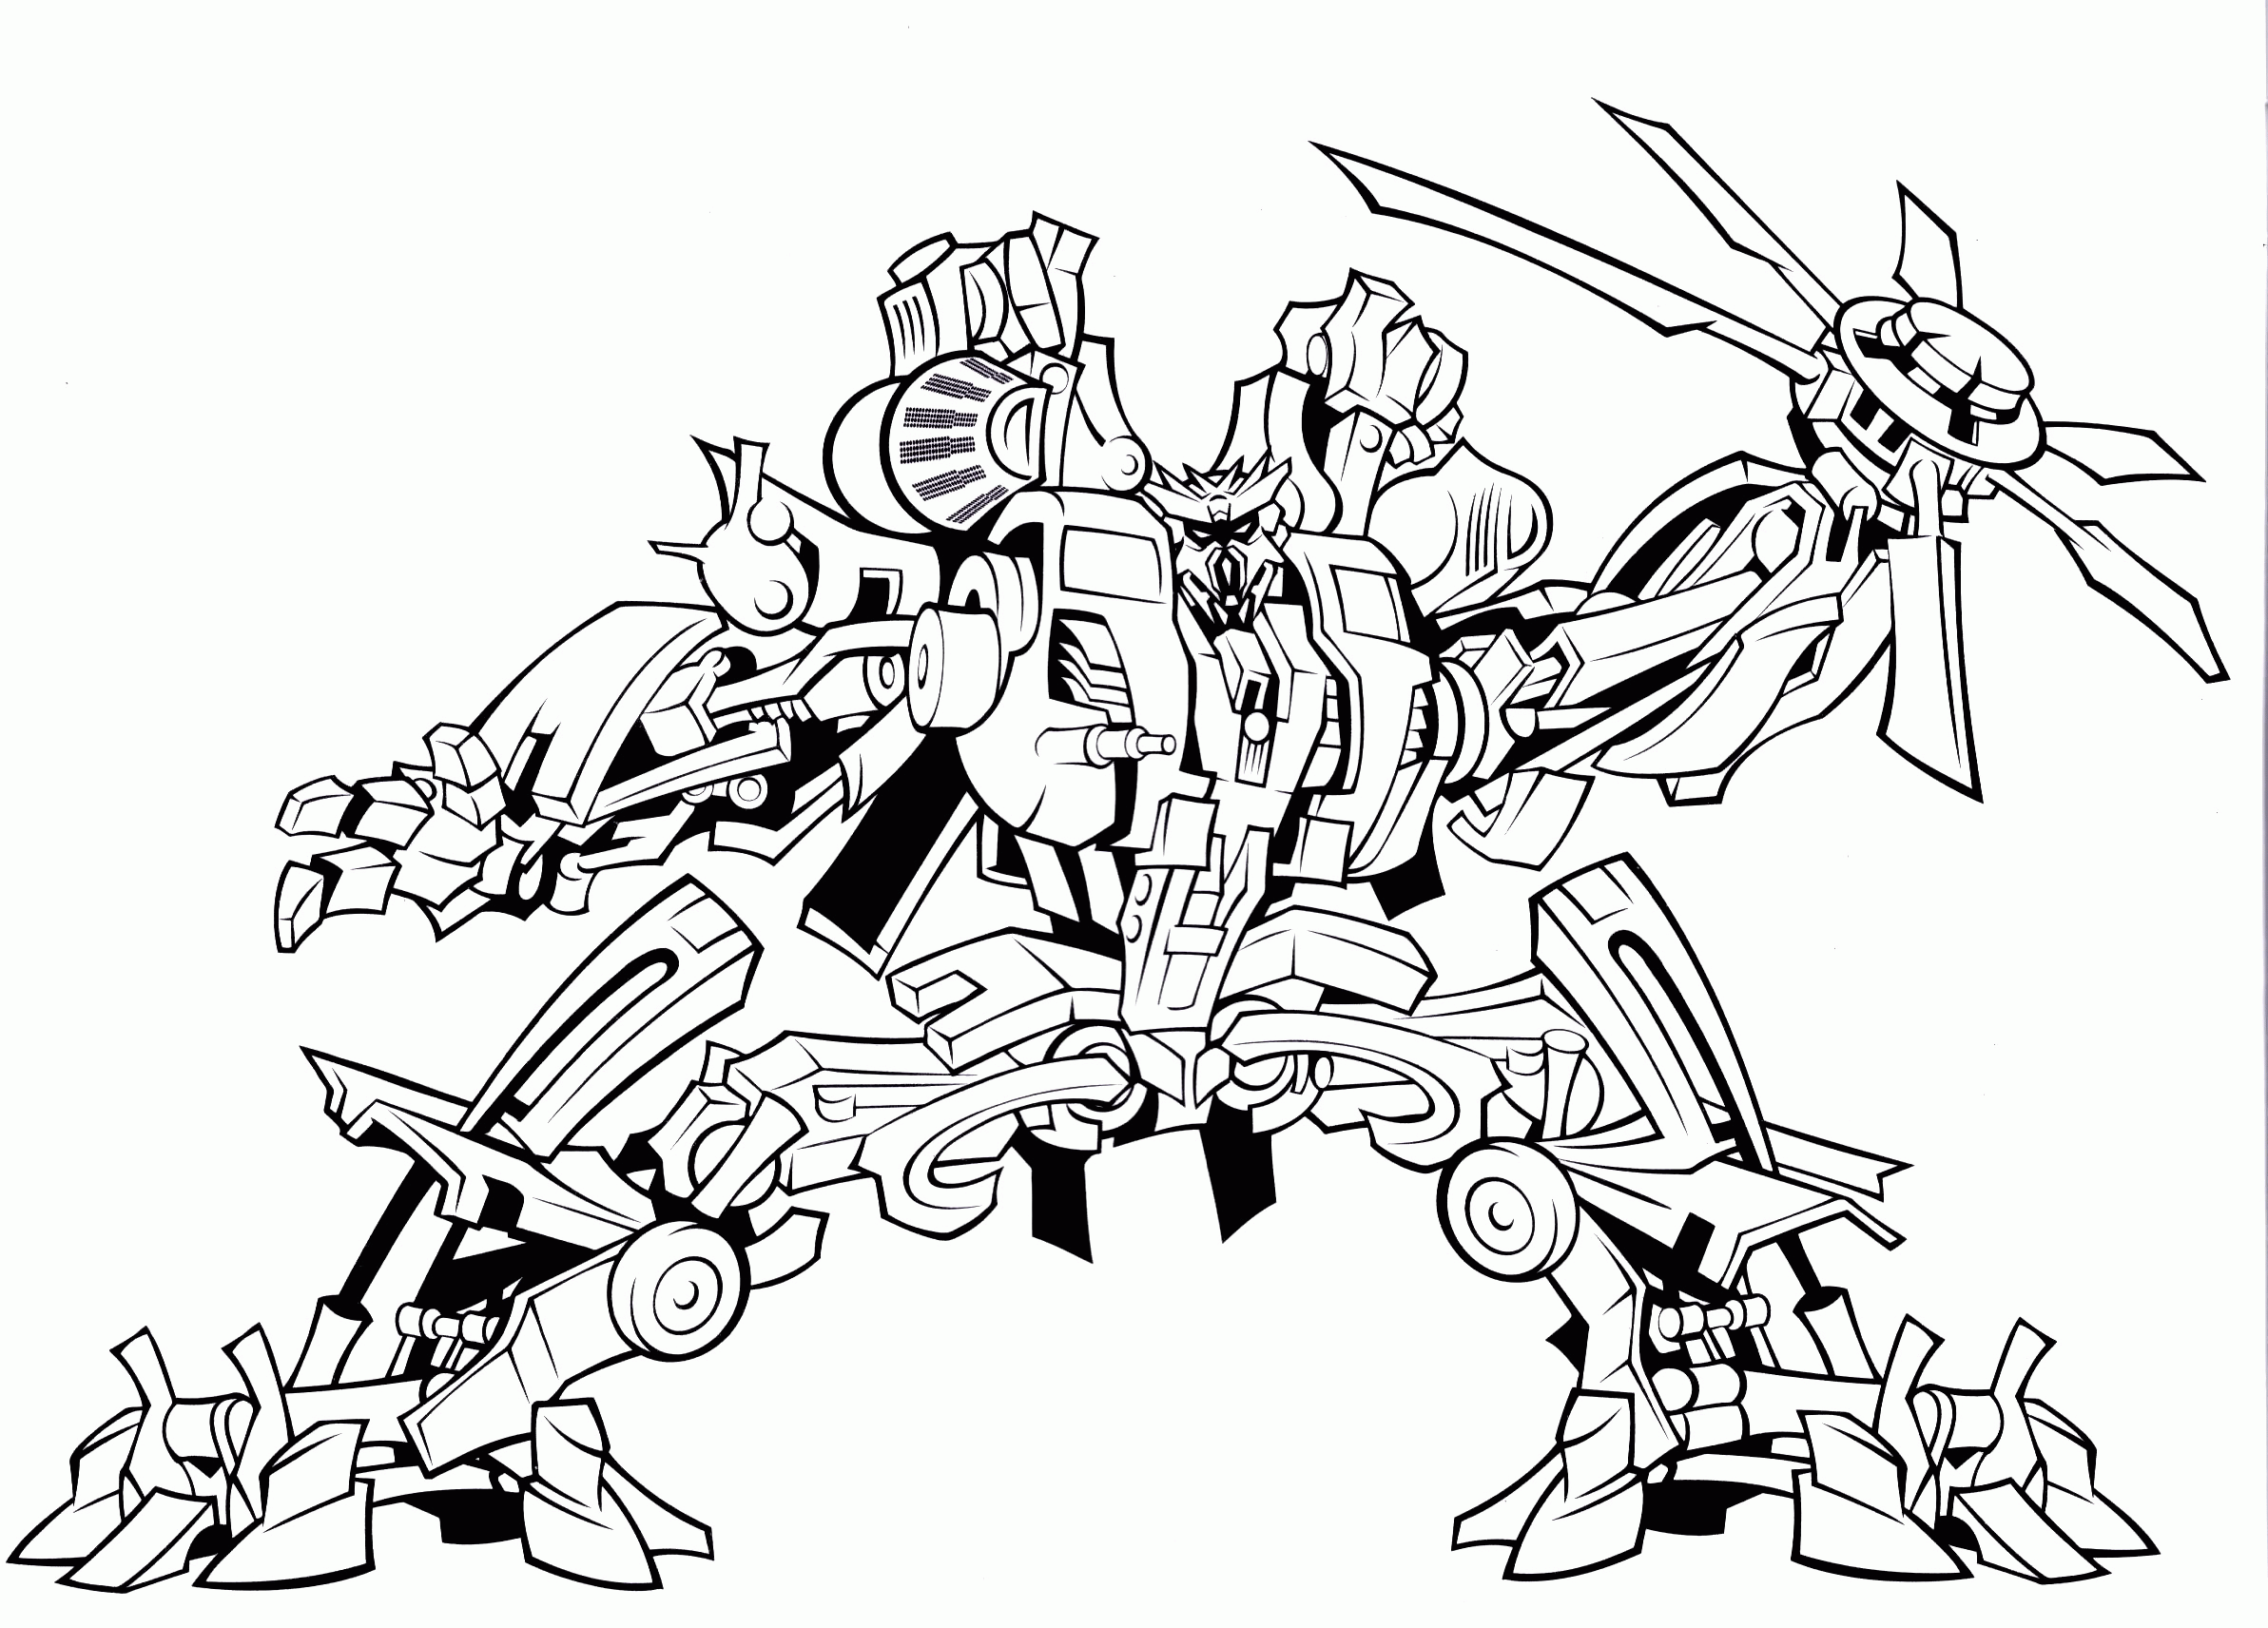 Transformers Coloring Page (16 Pictures) - Colorine.net | 13441